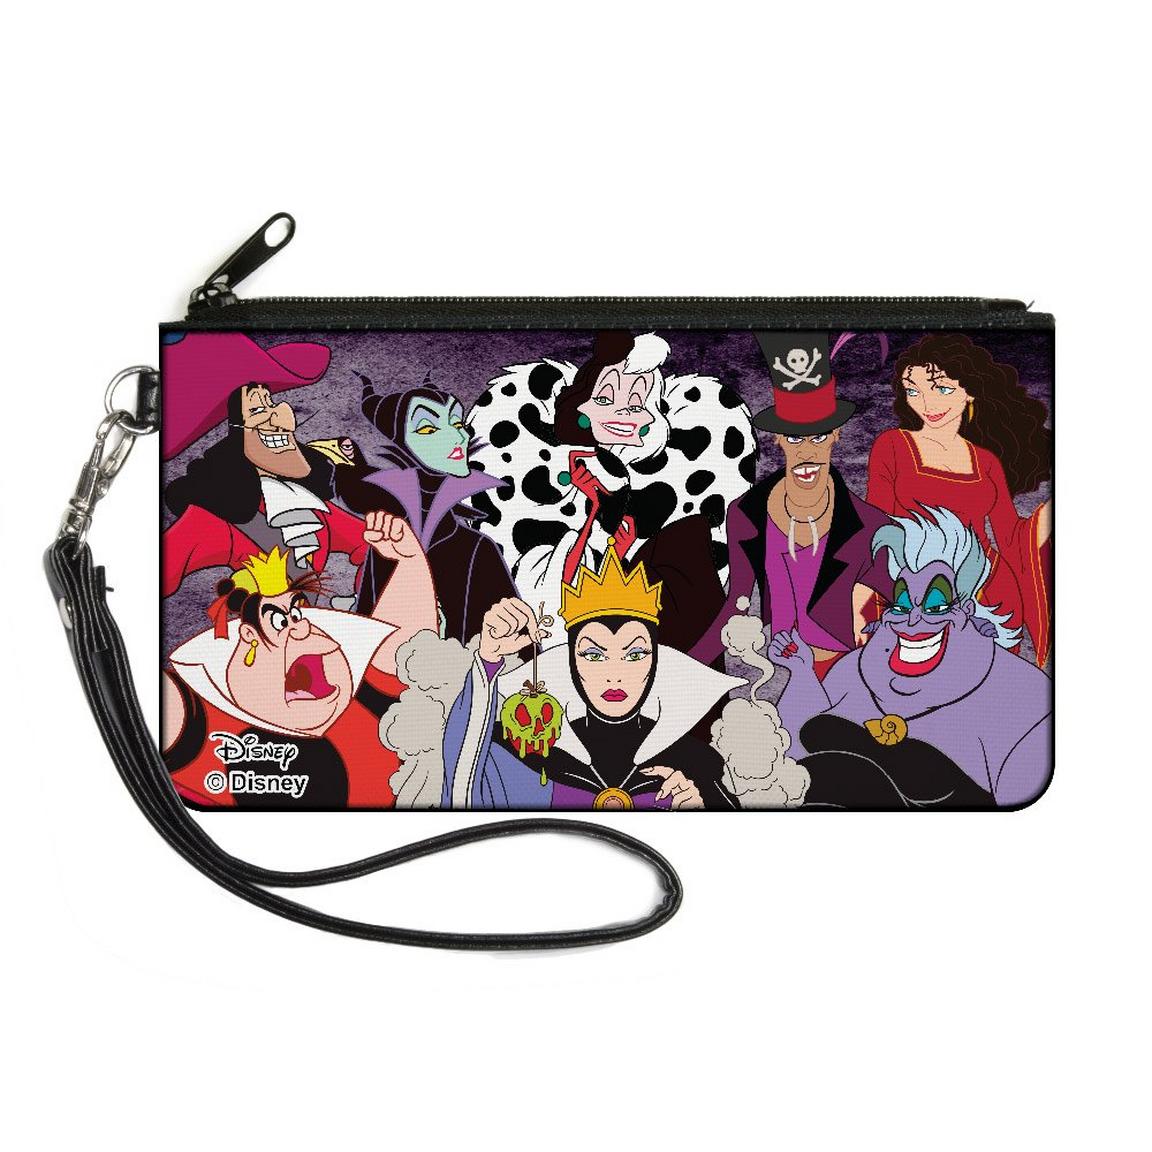 Buckle-Down Disney's Villains Canvas Zippered Wallet, Size: One Size, Buckle Down